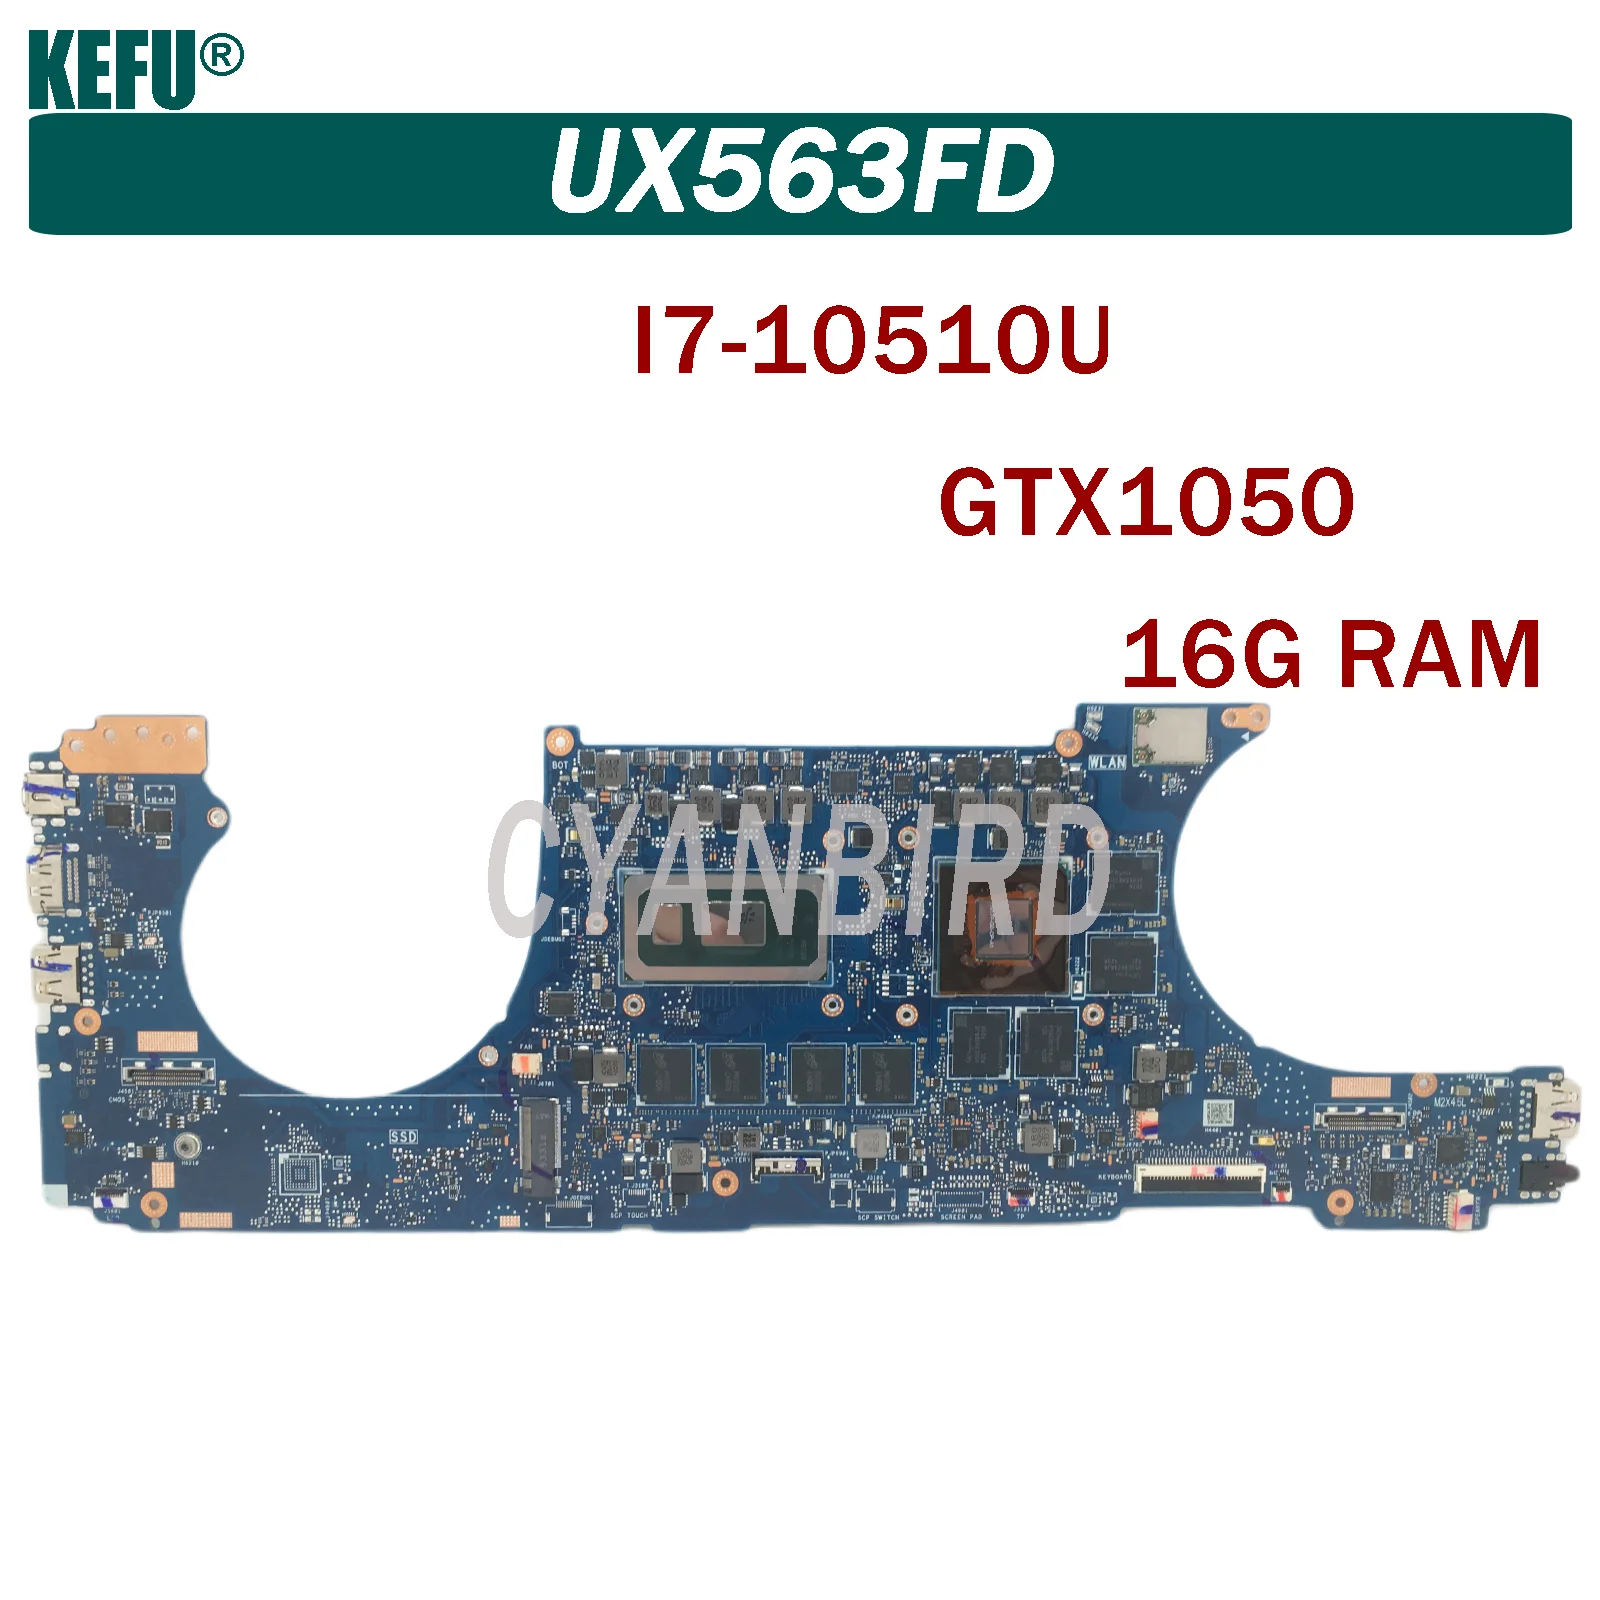 

UX563FD is suitable for Asus ZenBook UX563FD UX563F Q547FD notebook motherboard with I7-10510U GTX1050 16G-RAM